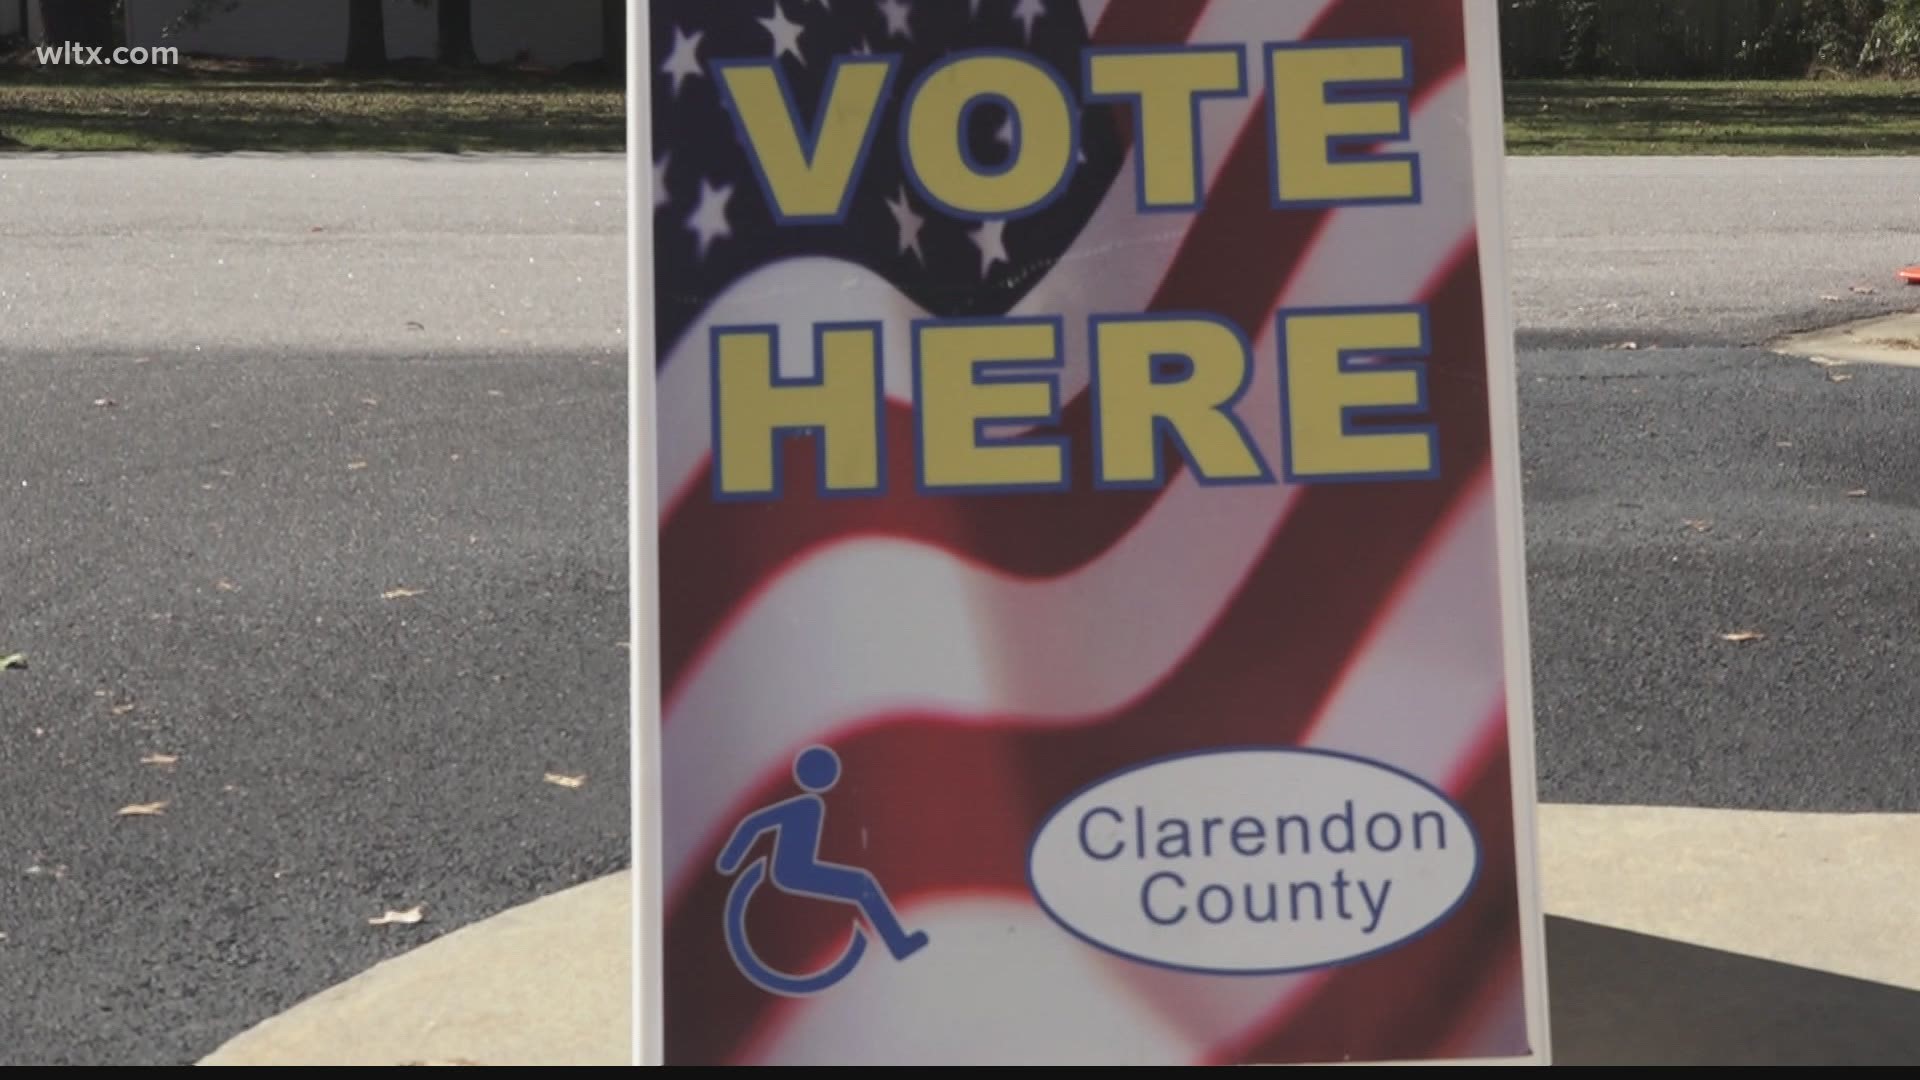 News19 checked in with voters in Clarendon County who were casting their ballots early.